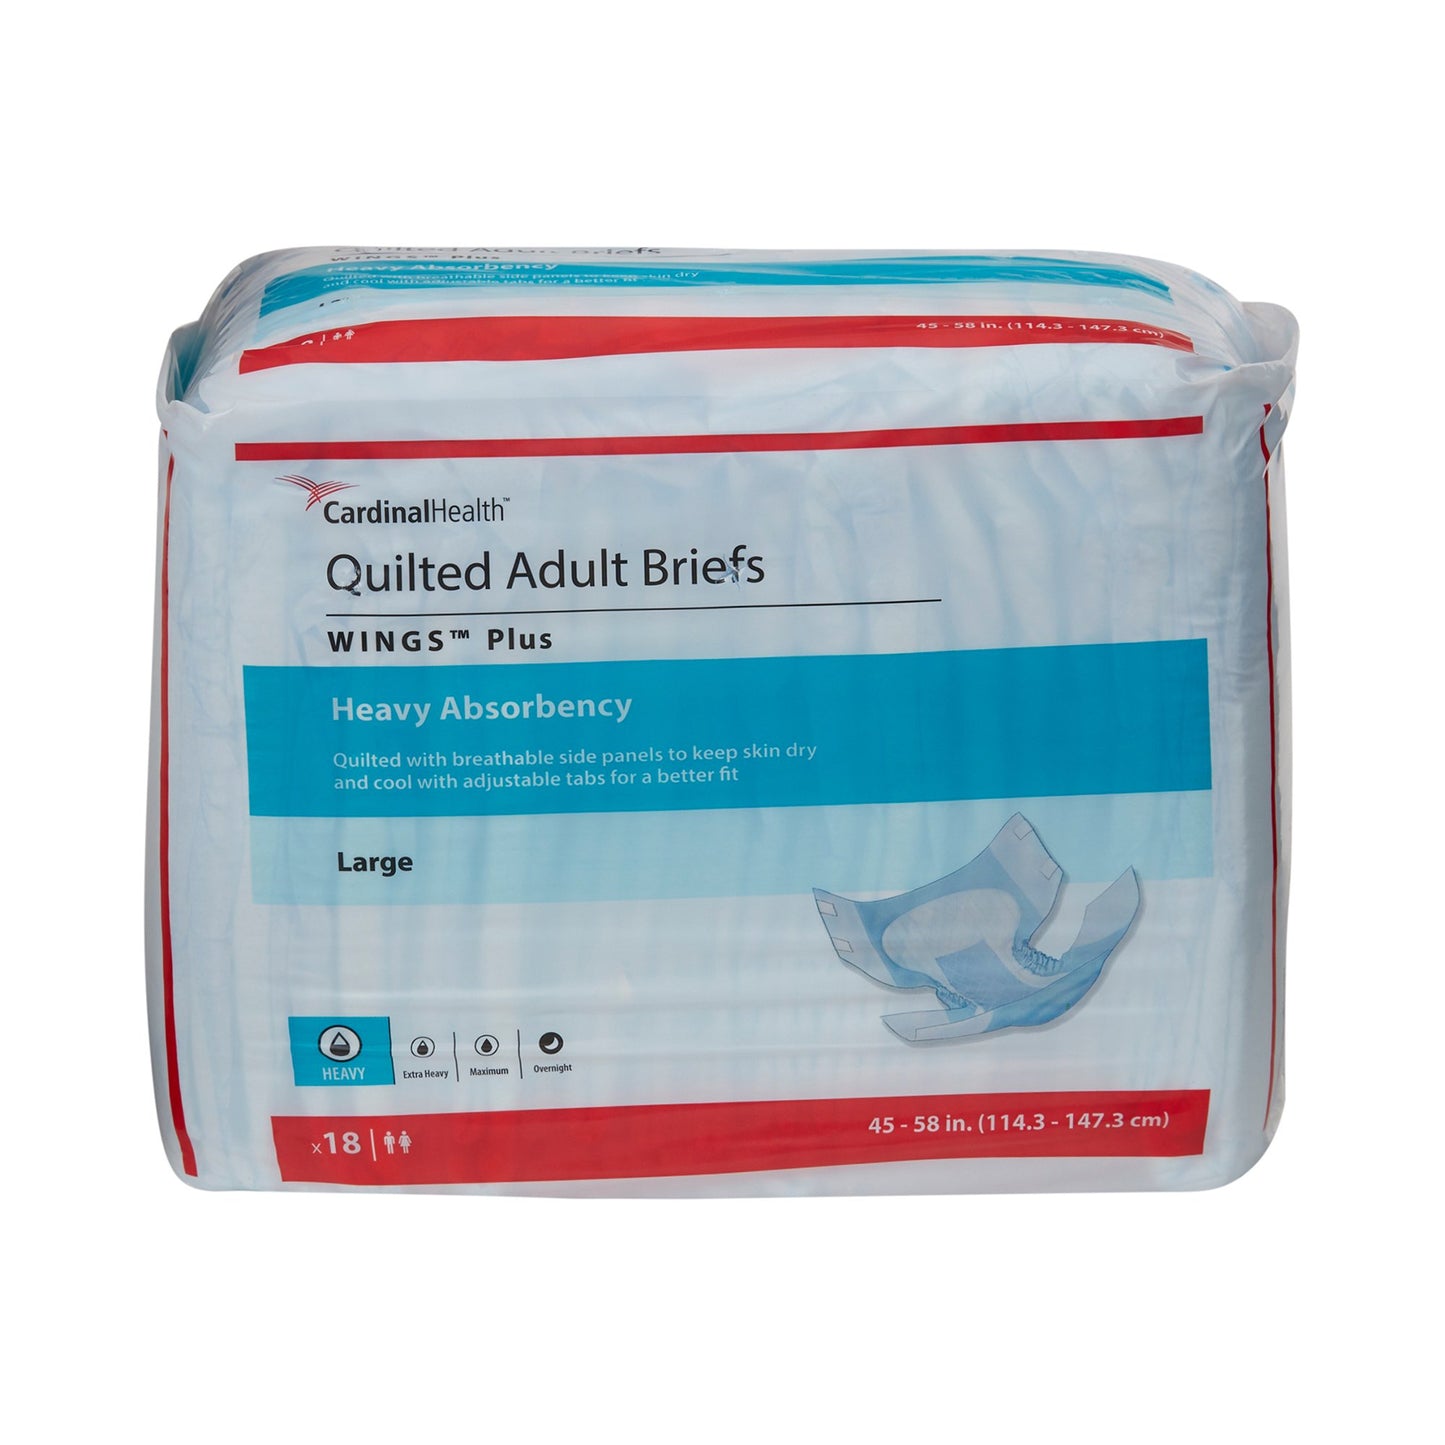 Wings™ Plus Quilted Heavy Absorbency Incontinence Brief, Large, 18 ct